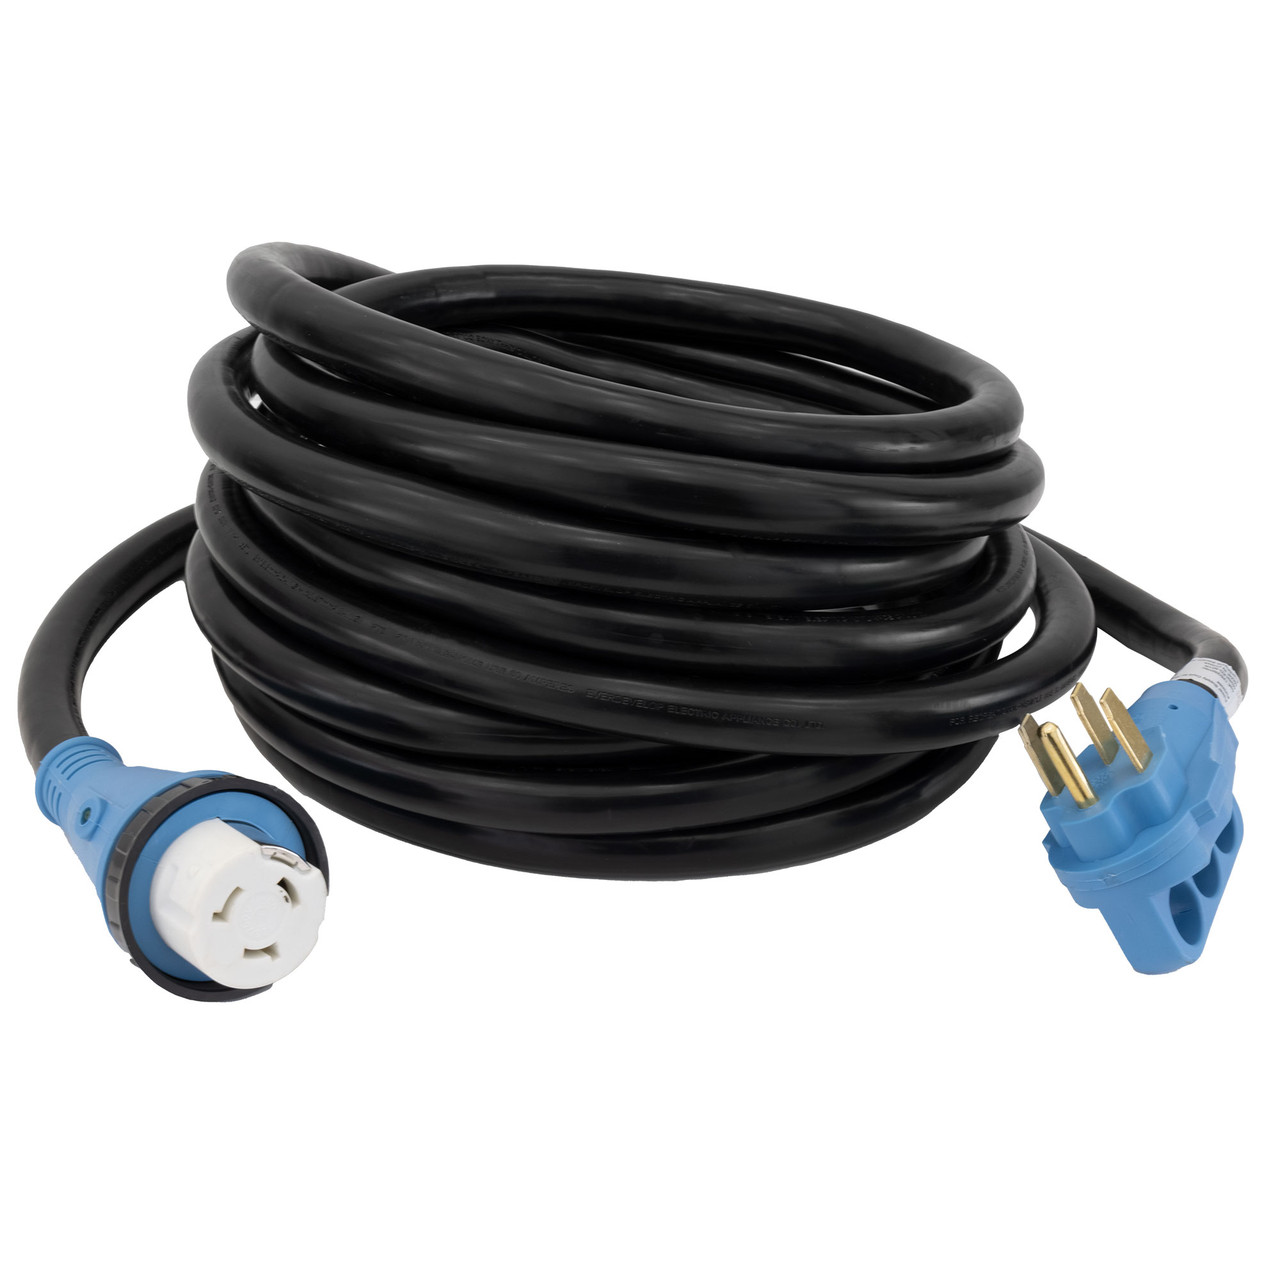 Cable Matters 3 Prong 30 AMP RV Extension Cord 25 Ft - 25 Feet